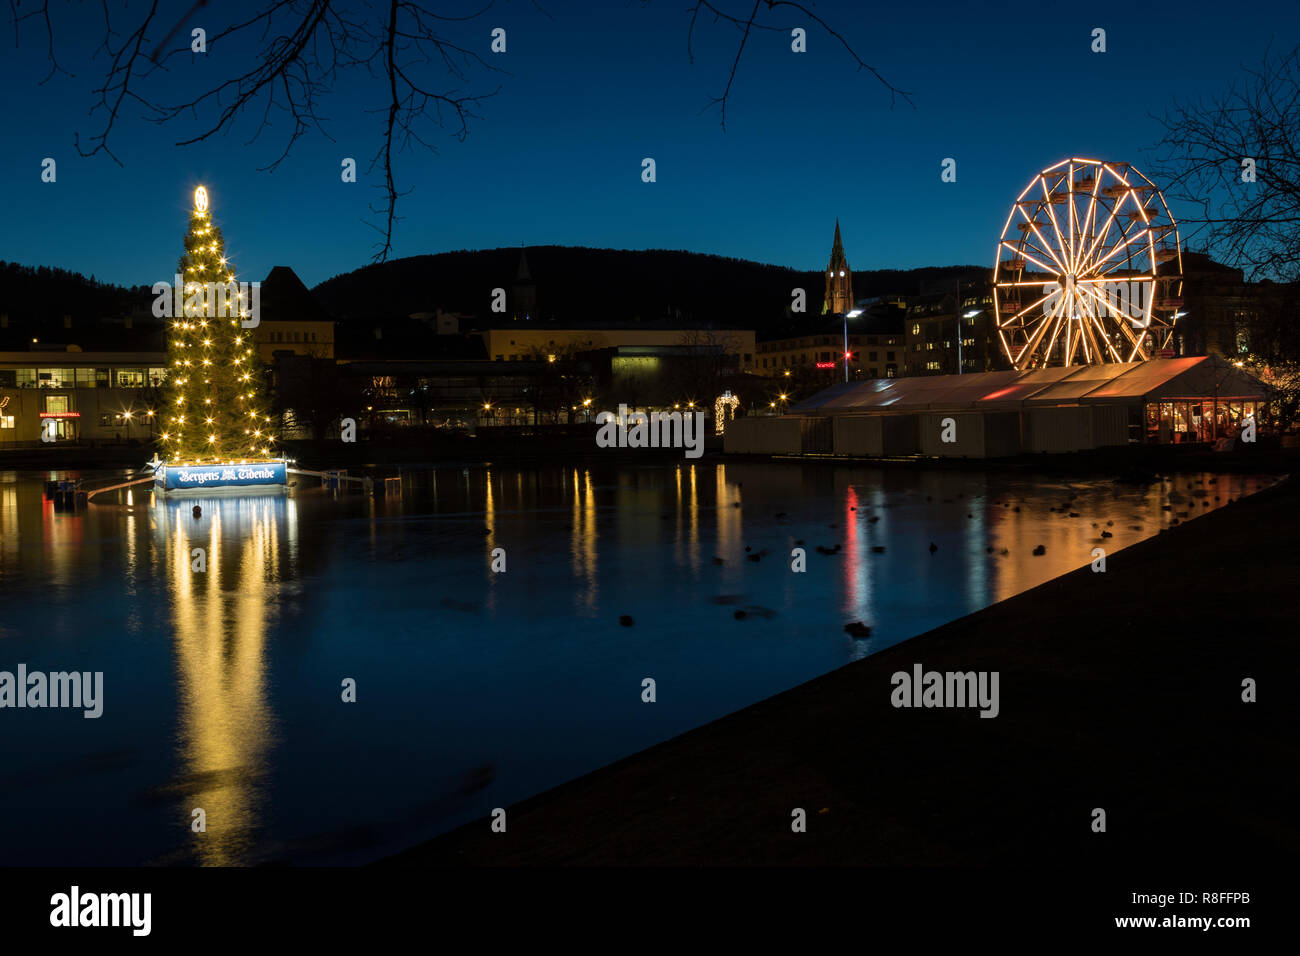 Christmas Market by Lille Lungegaardsvannet Lake in downtown Bergen, Norway Stock Photo